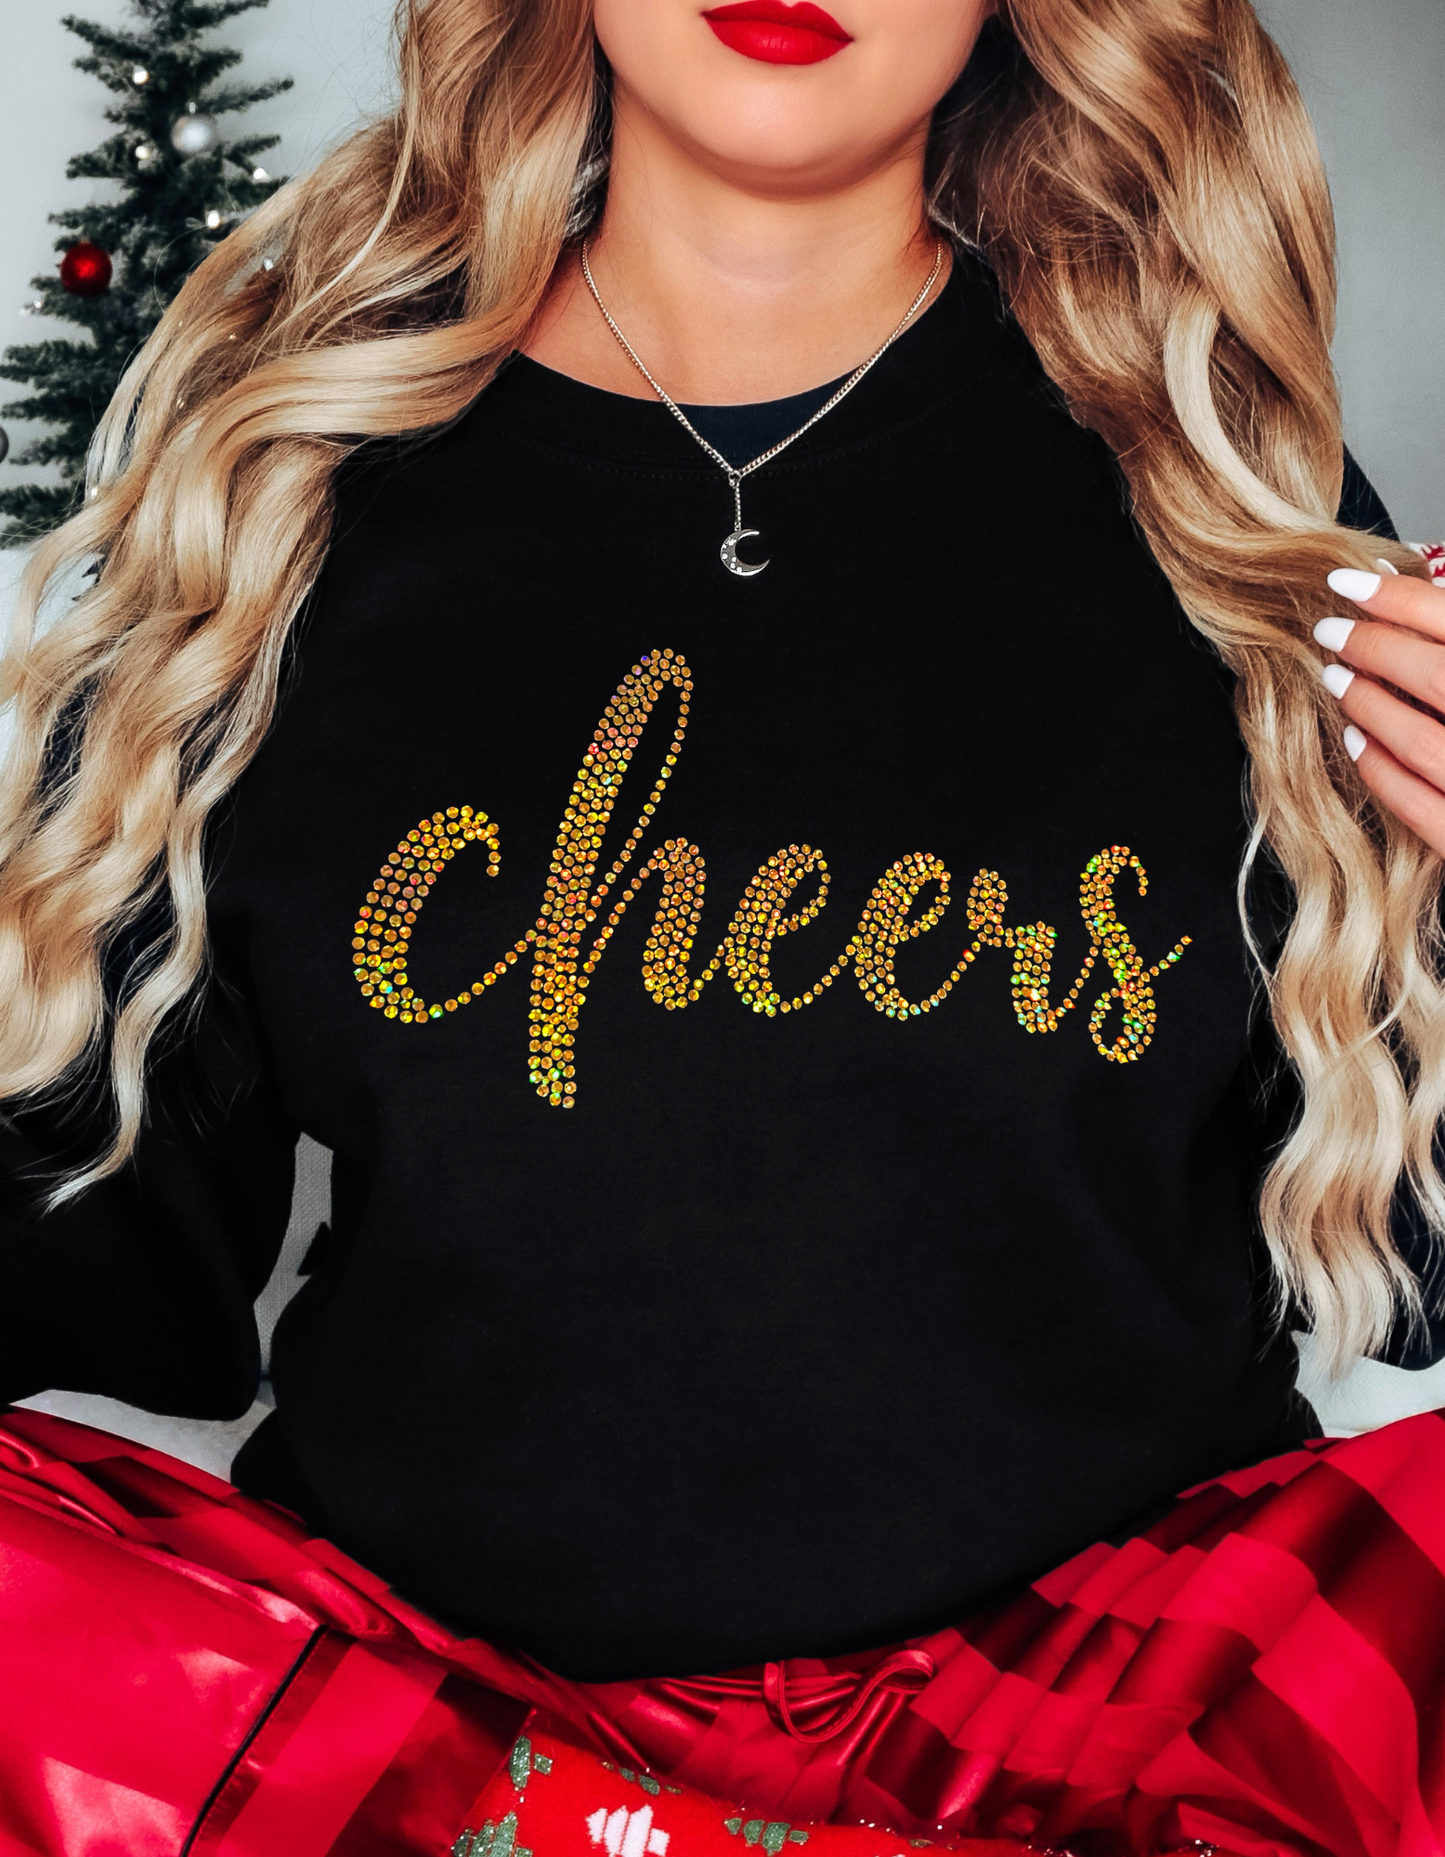 New Year’s Eve Cheers Sweatshirt- Gold or Silver look